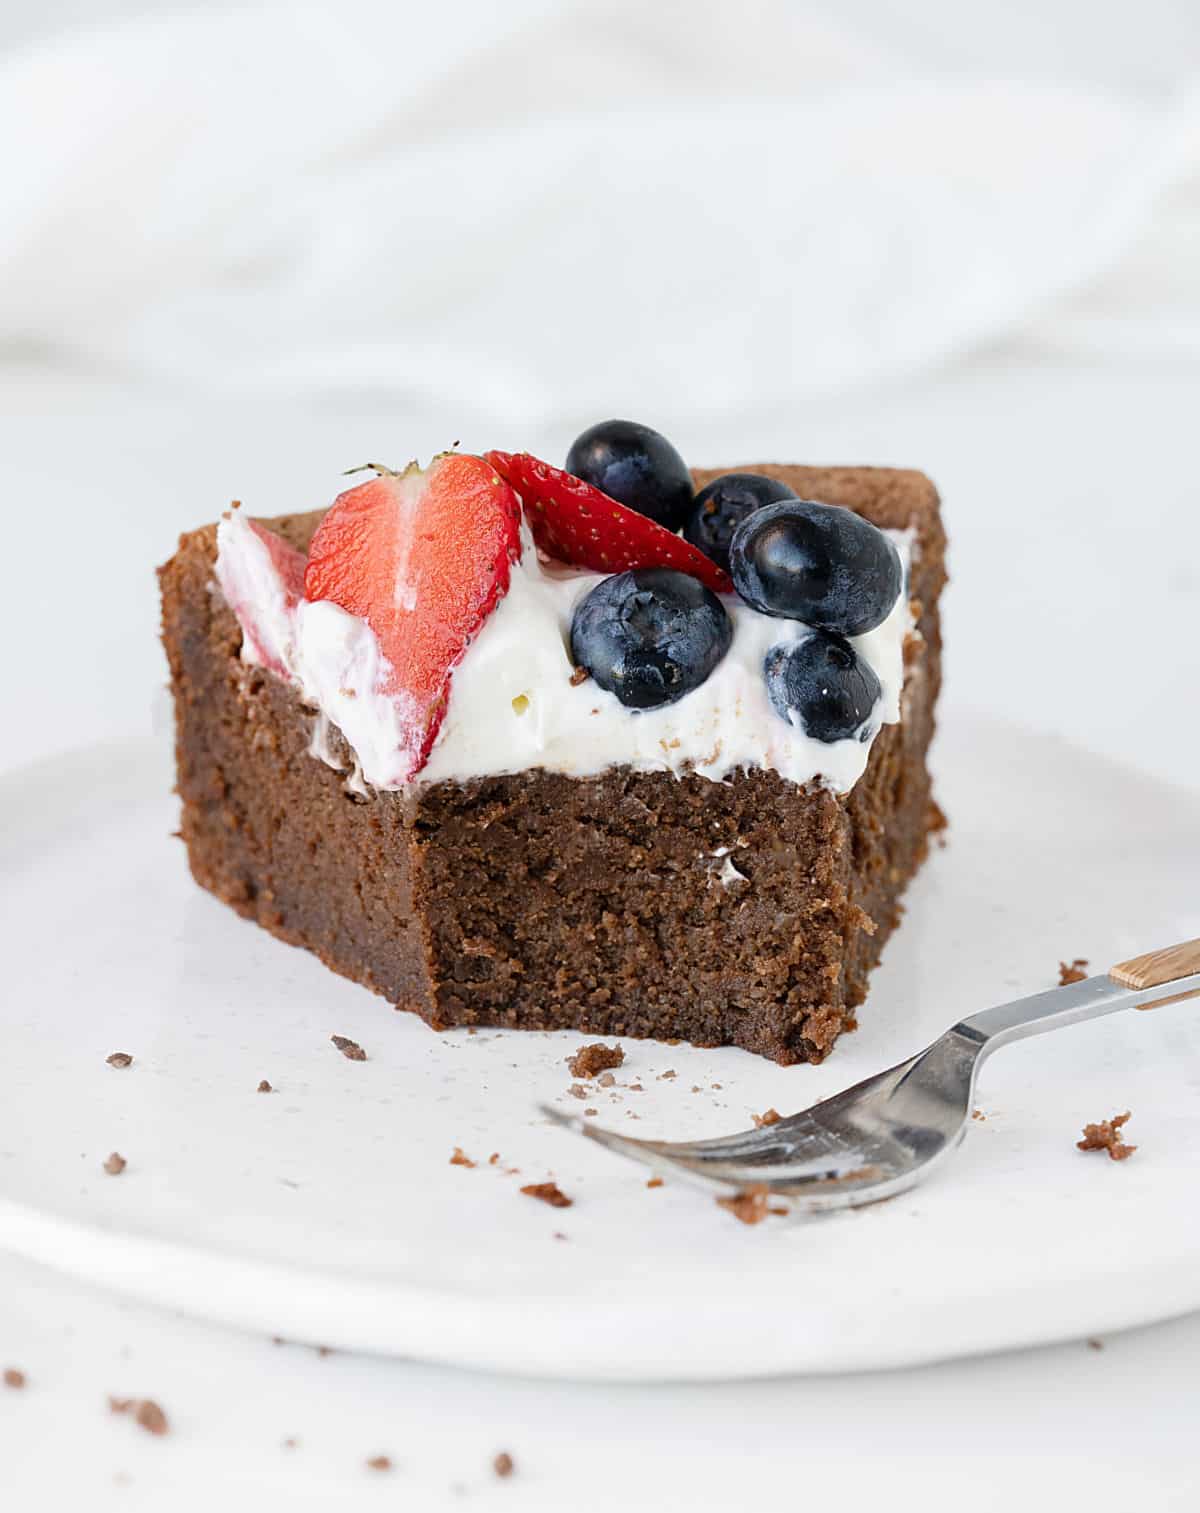 Eaten slice of chocolate cake with cream and berries on a white plate. Silver fork. White background.